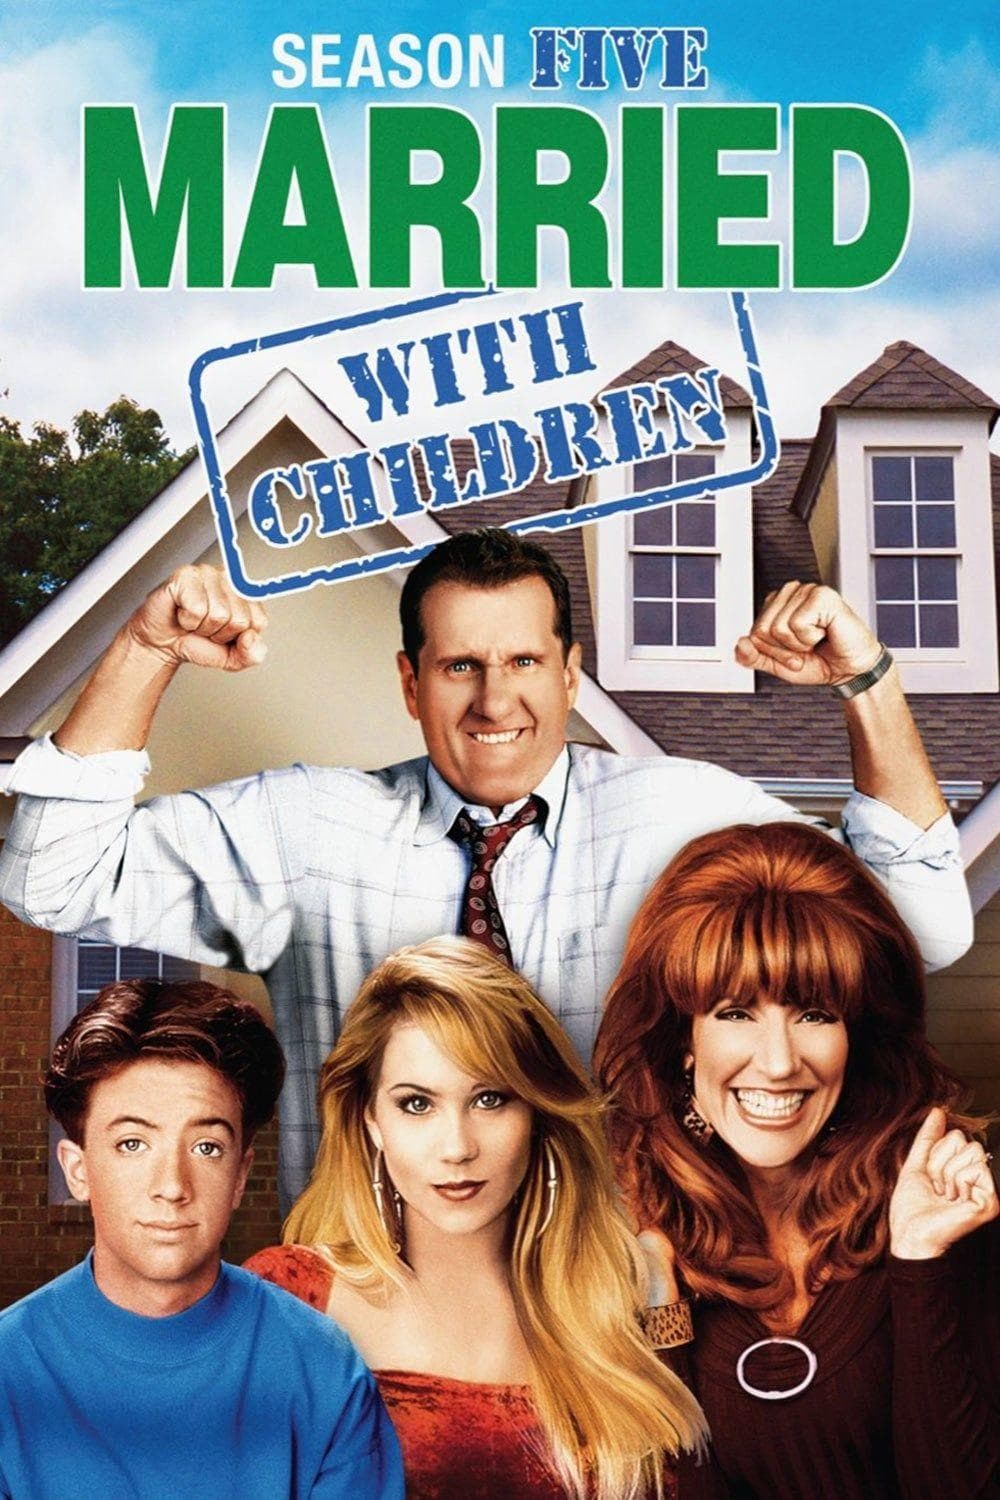 Random Best Seasons of 'Married... With Children' Thumb Image